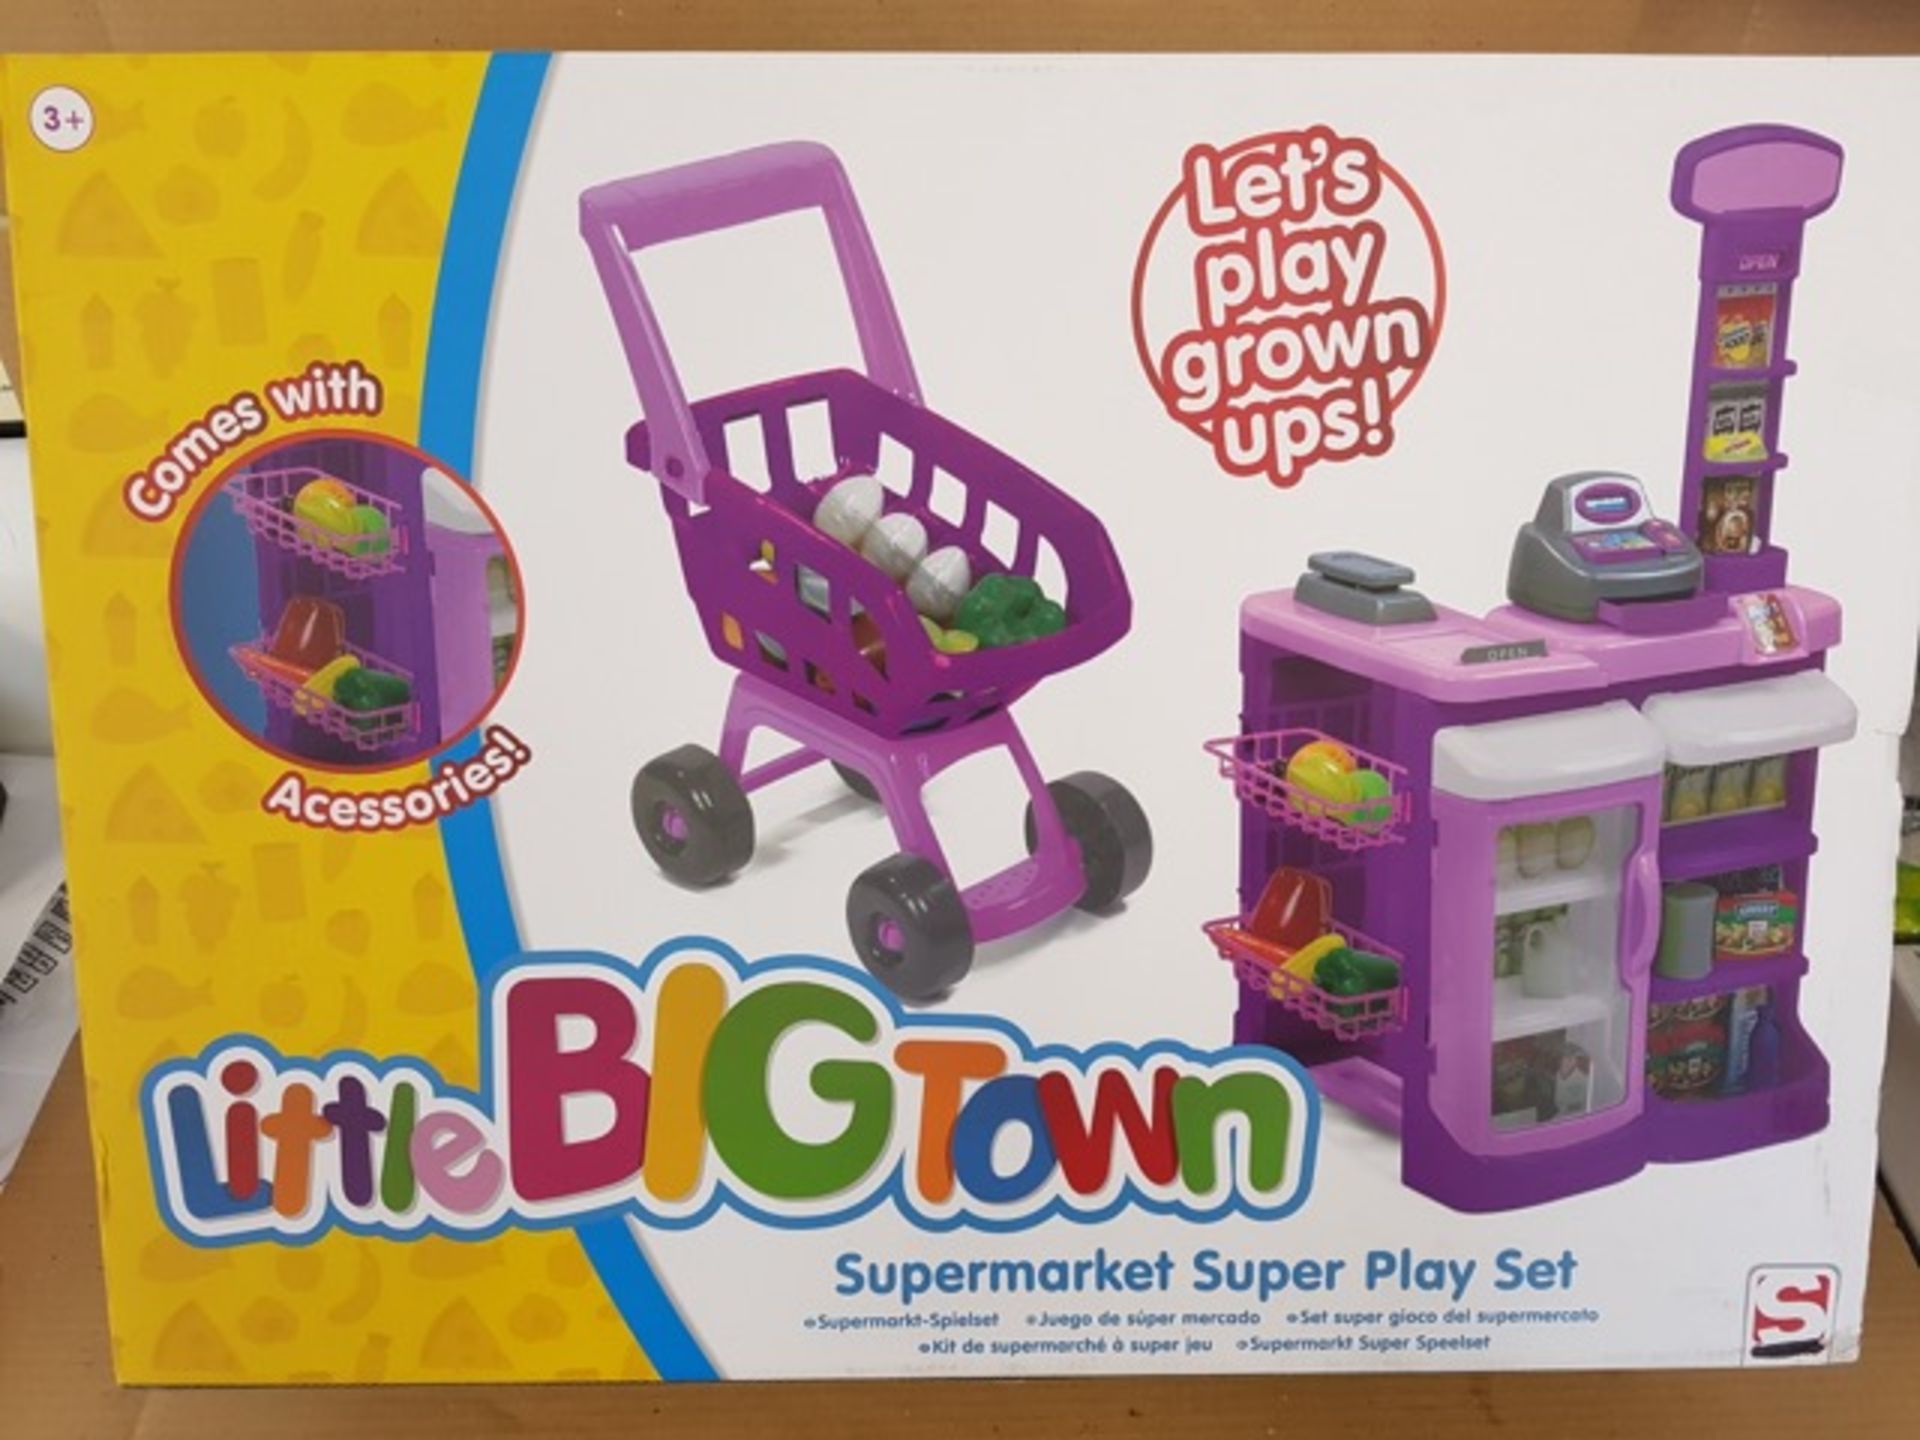 PALLET TO CONTAIN 30 x Brand New Little Big Town Extra Large Supermarket Super Play Set's - RRP £